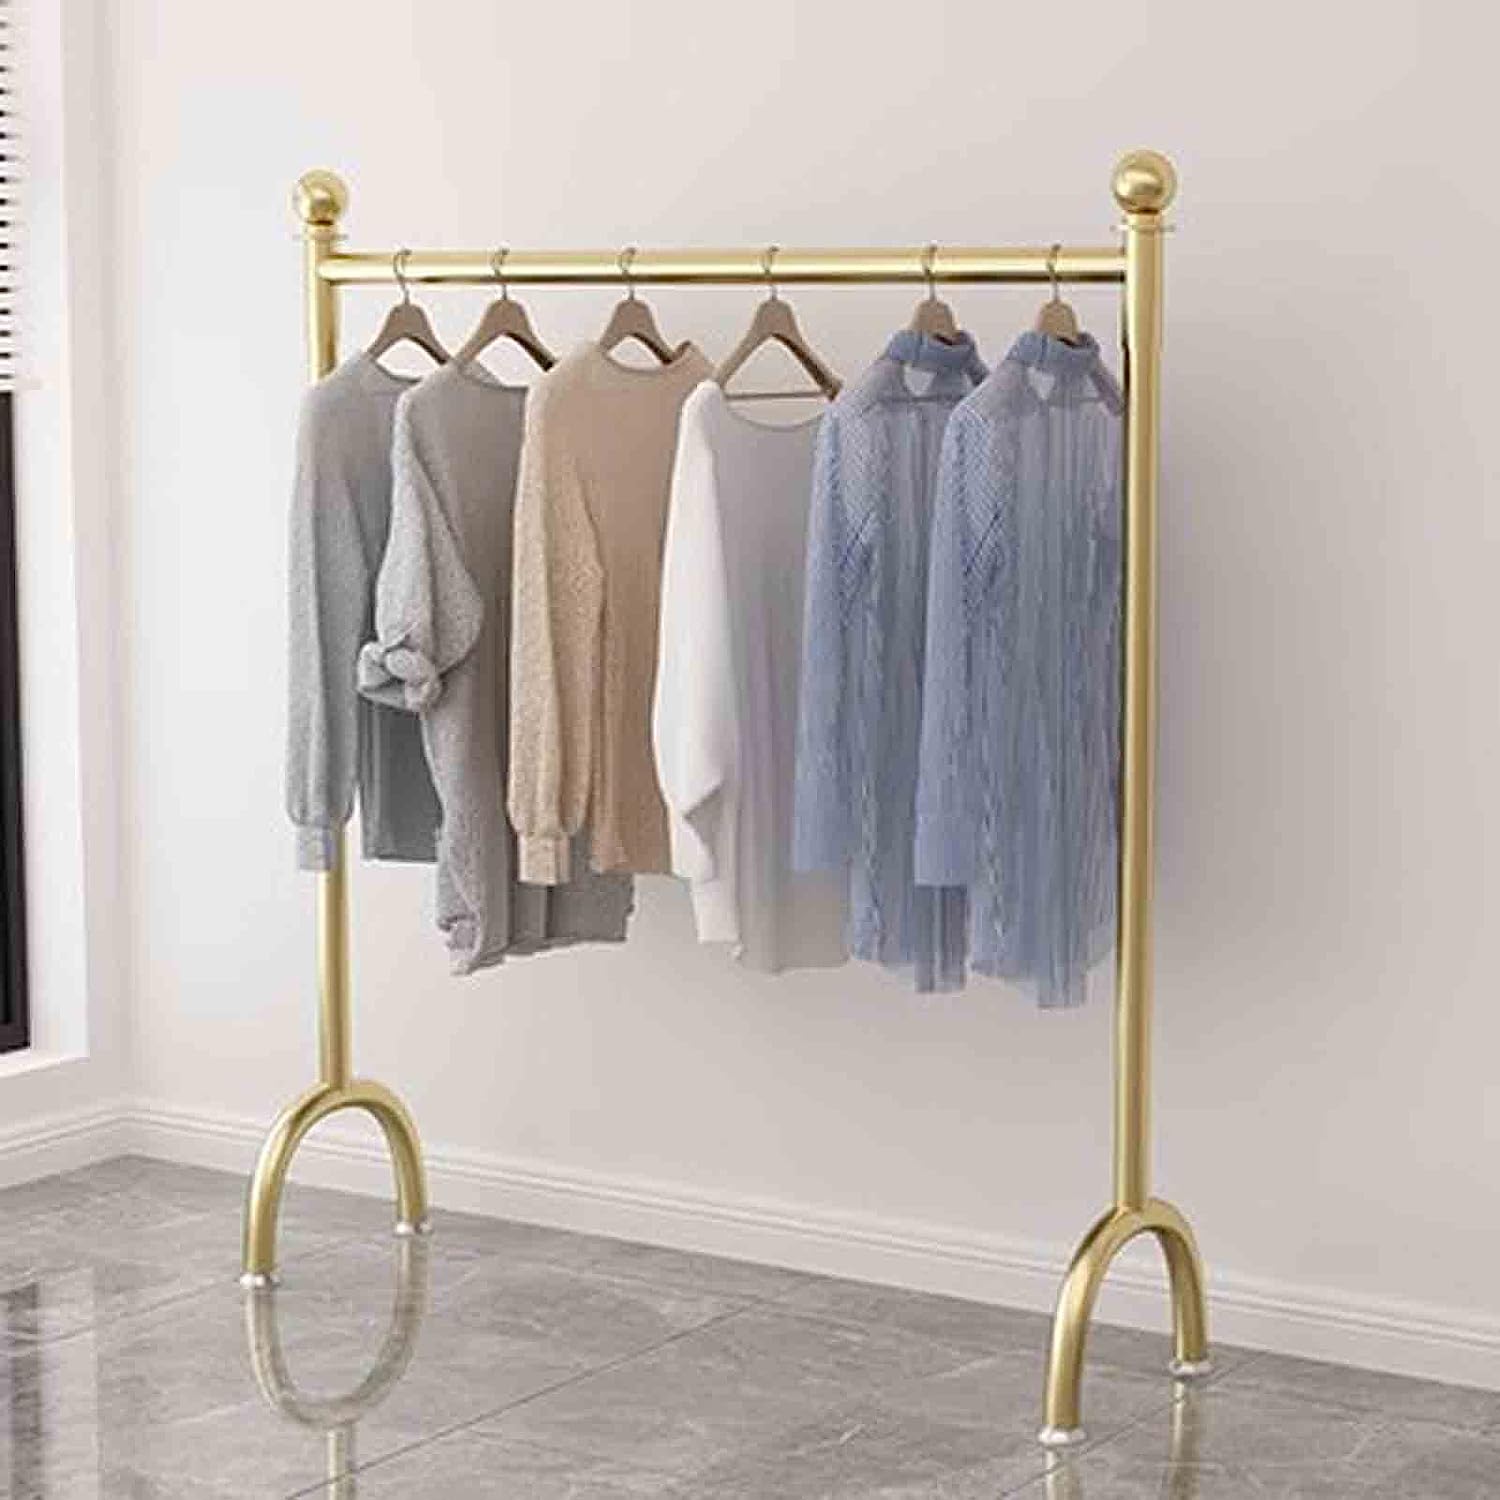 Portable Standing Clothes Rack,Gold,Modern Rolling Garment Rack,Design Unique,with Non Slip Beads,Simple Coat Hanger Rack, Hanging Coats,Skirts,Shirts(Size:100x120cm)